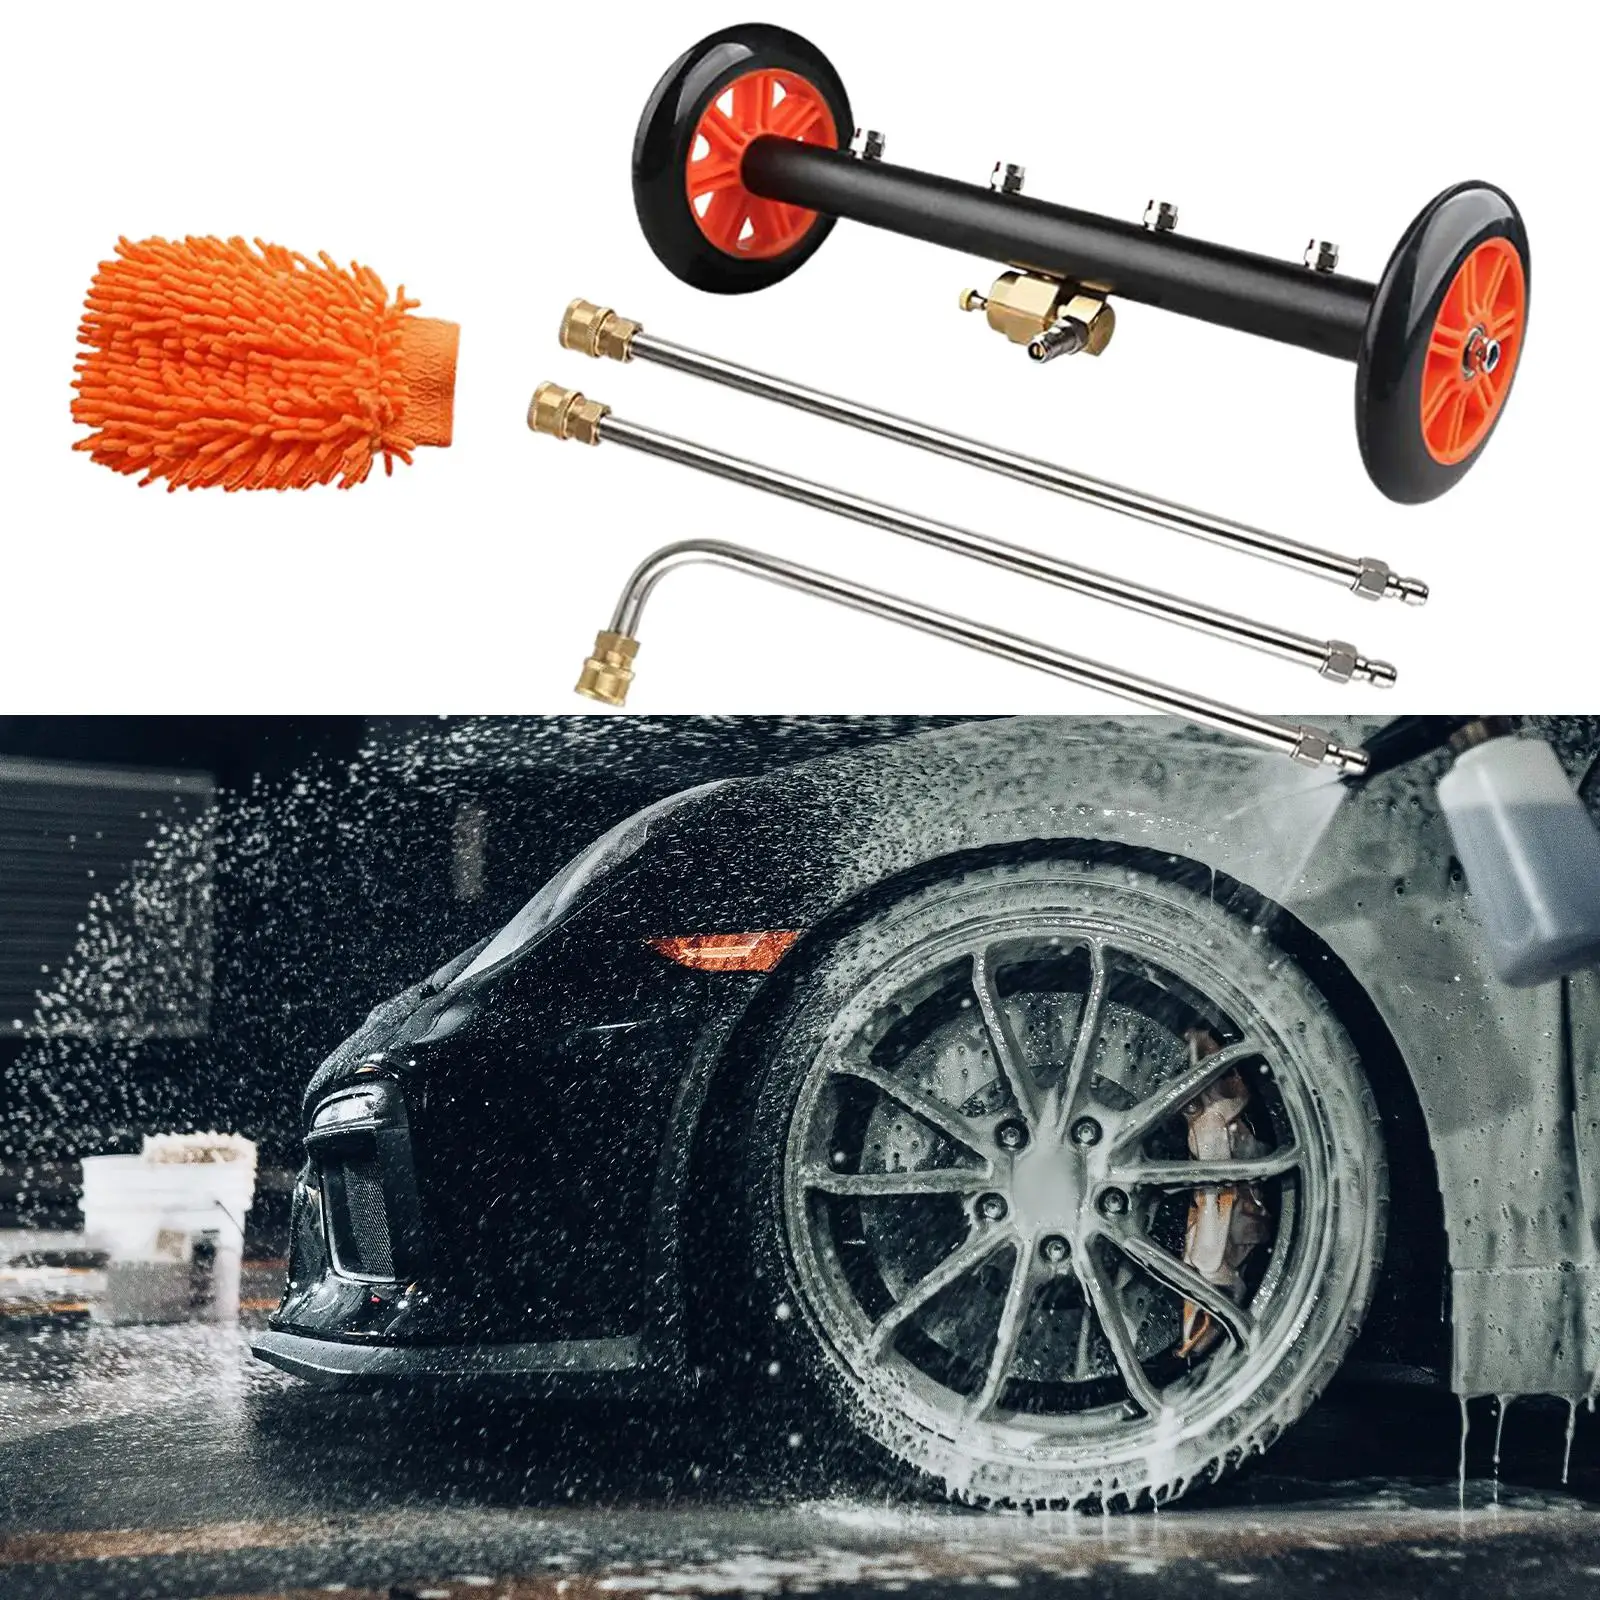 Power Washer Surface Cleaner with Extension Wands Undercarriage Water Broom for Driveways Sidewalks Car Ground Cleaning Vehicles